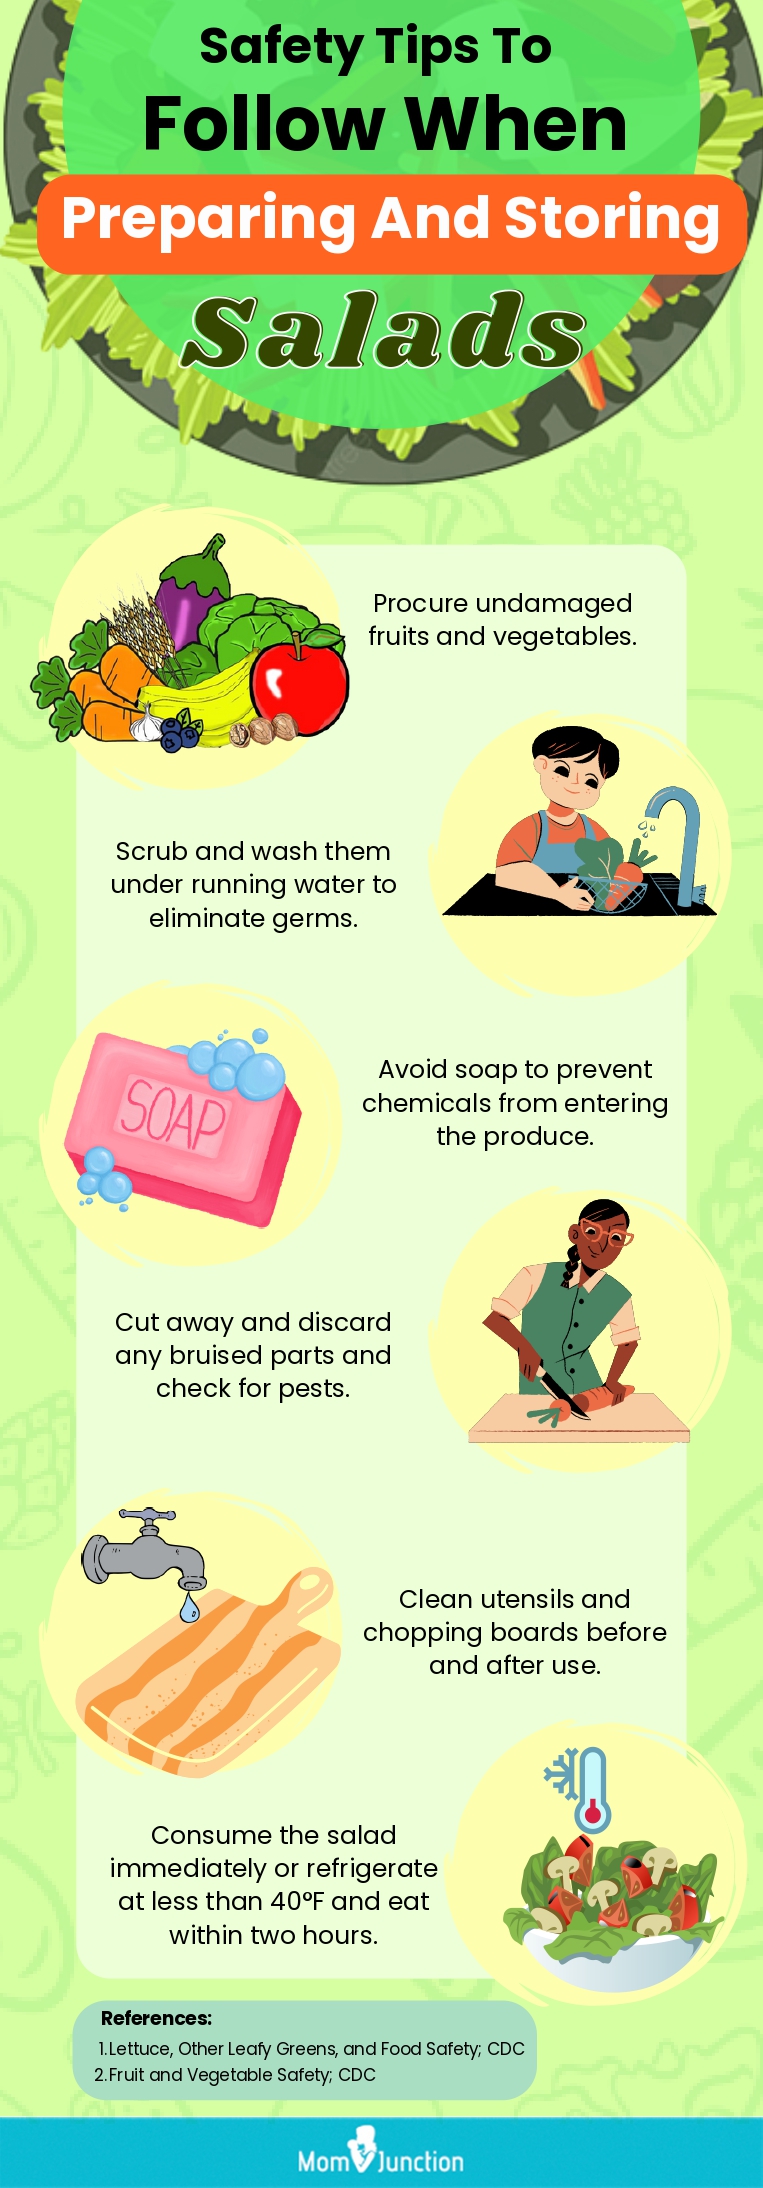 Safety Tips To Follow When Preparing And Storing Salads (infographic)